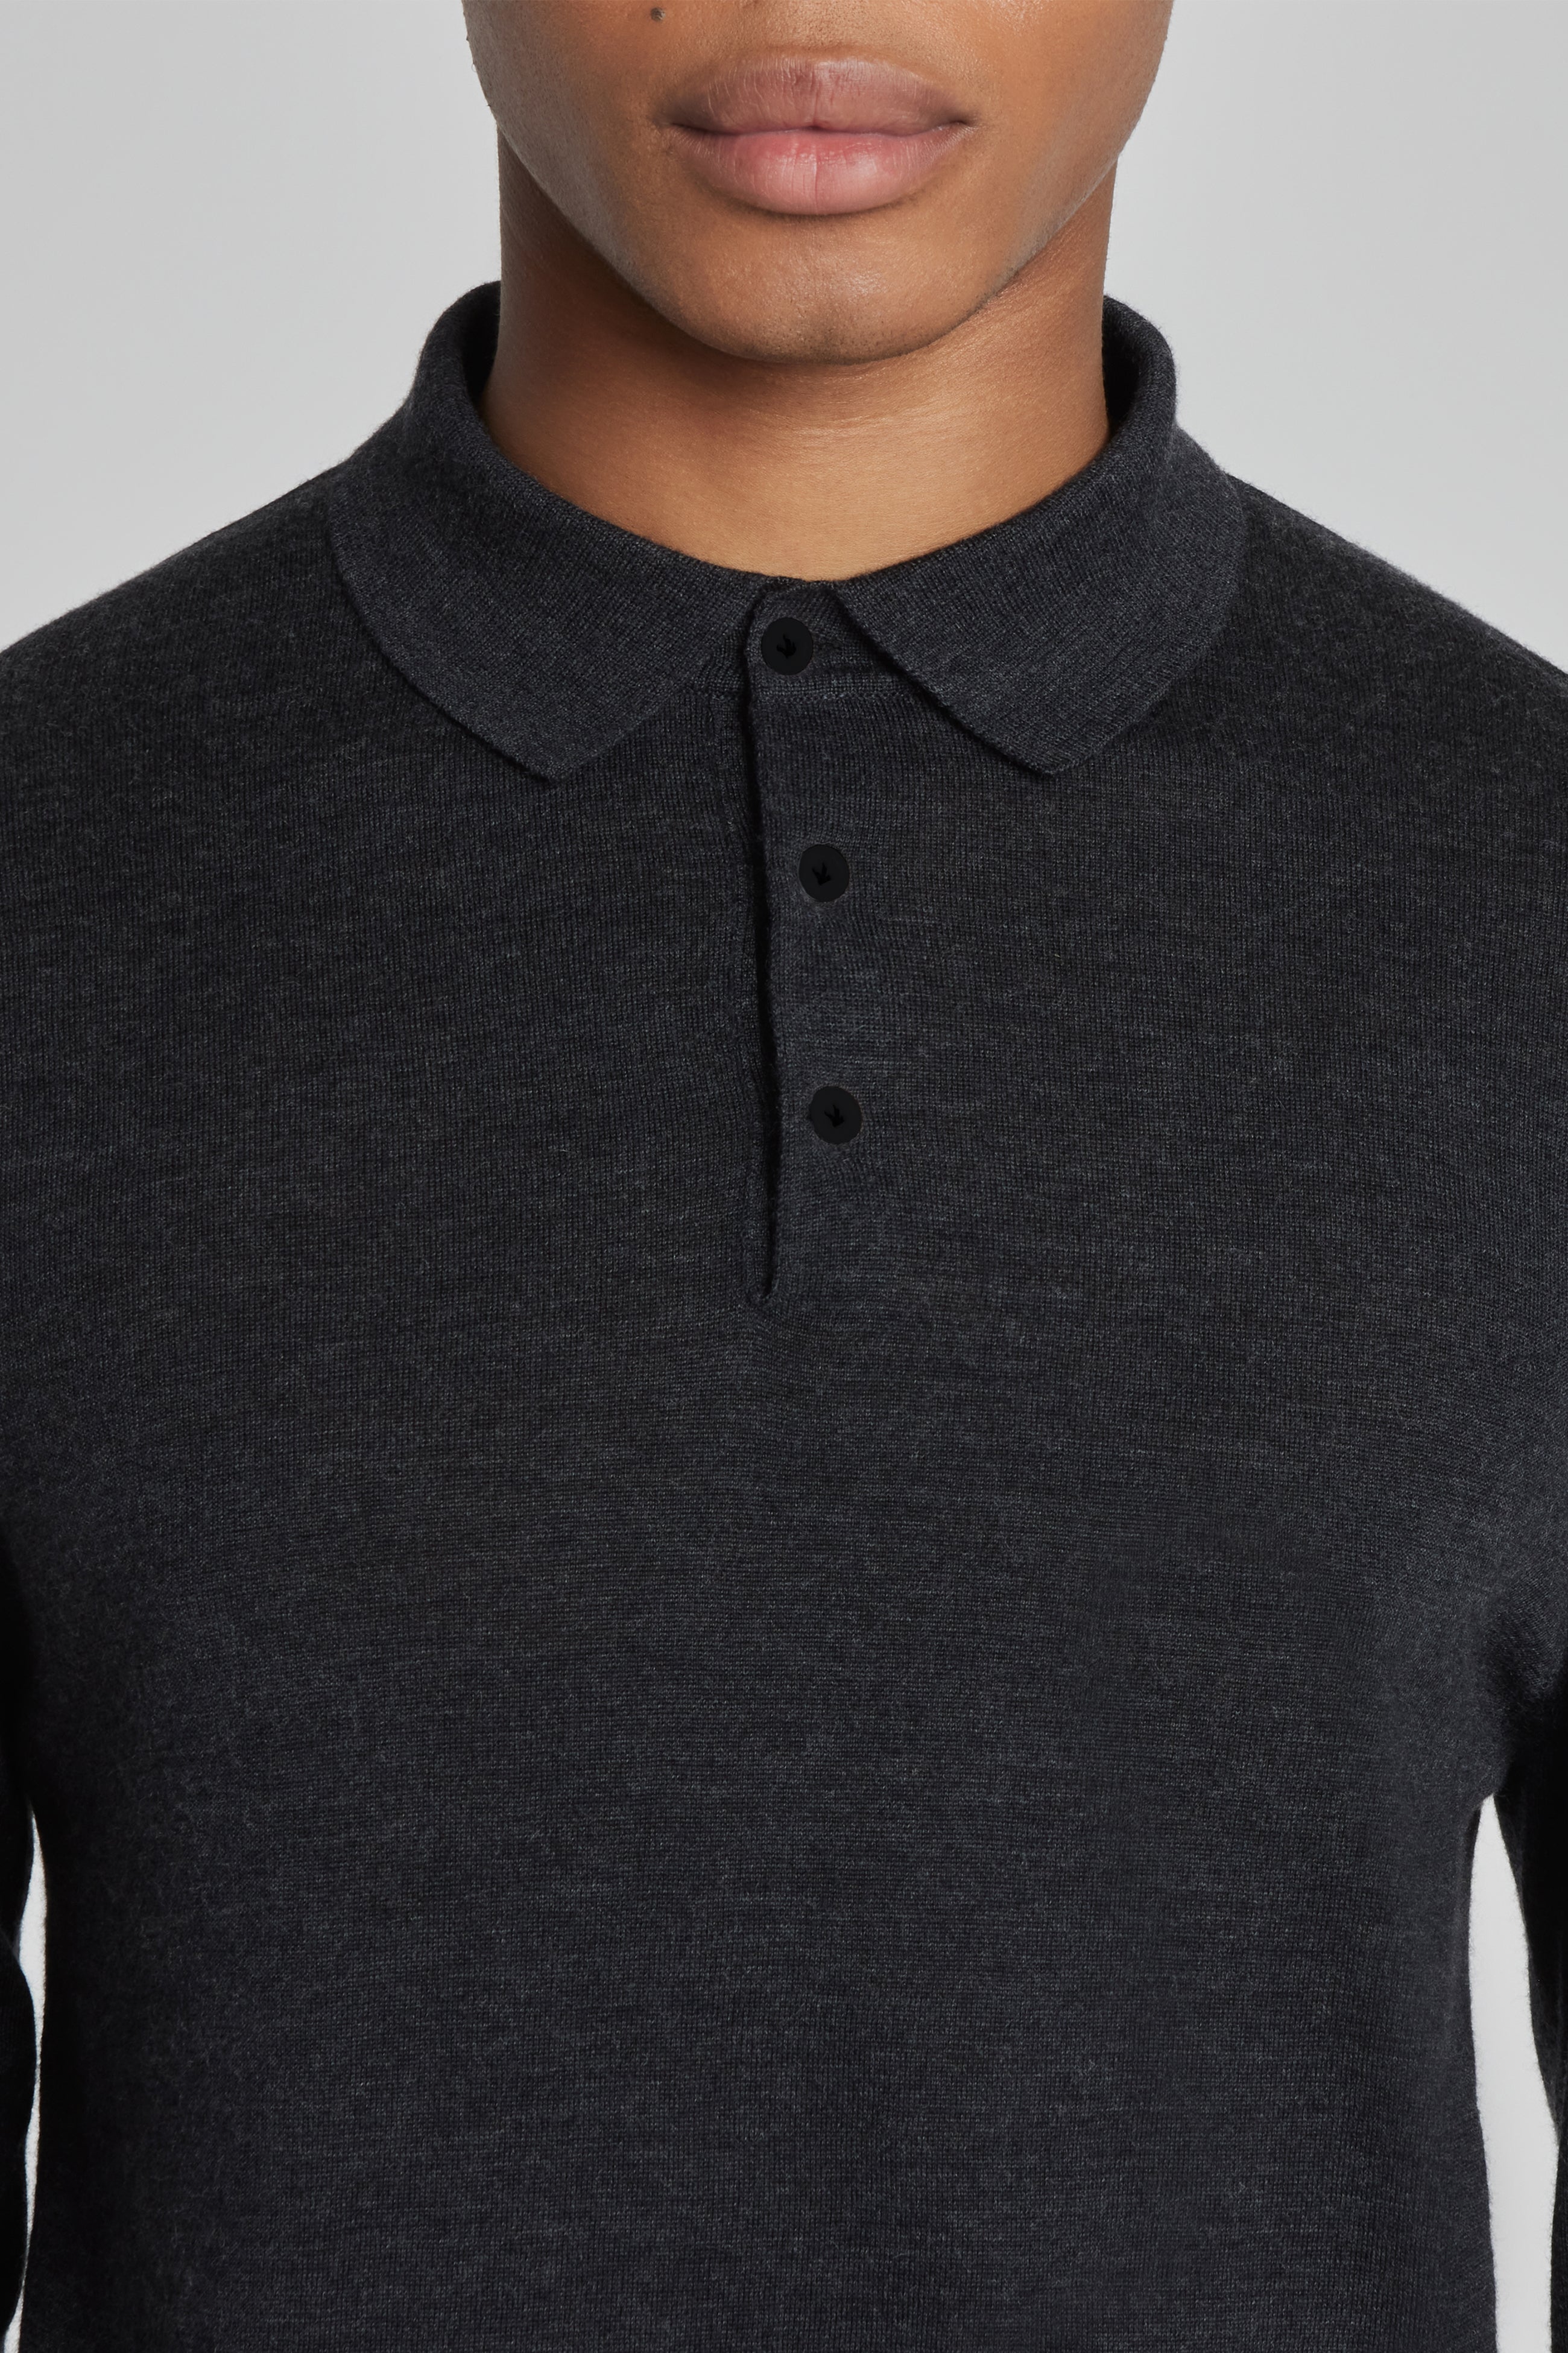 Alt view 2 Redfern Wool, Silk and Cashmere Long Sleeve Polo in Charcoal